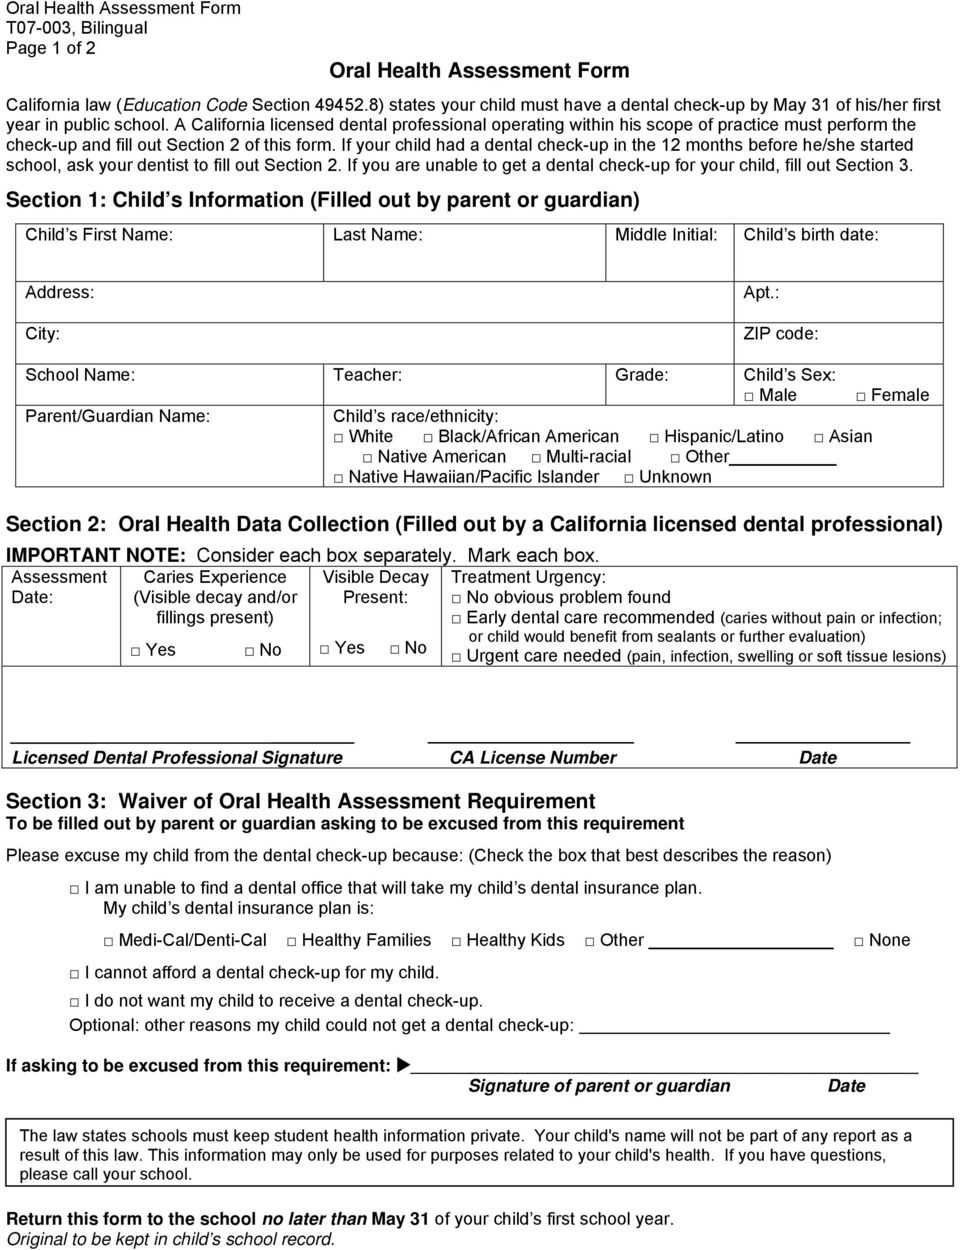 A California licensed dental professional operating within his scope of practice must perform the check-up and fill out Section 2 of this form.